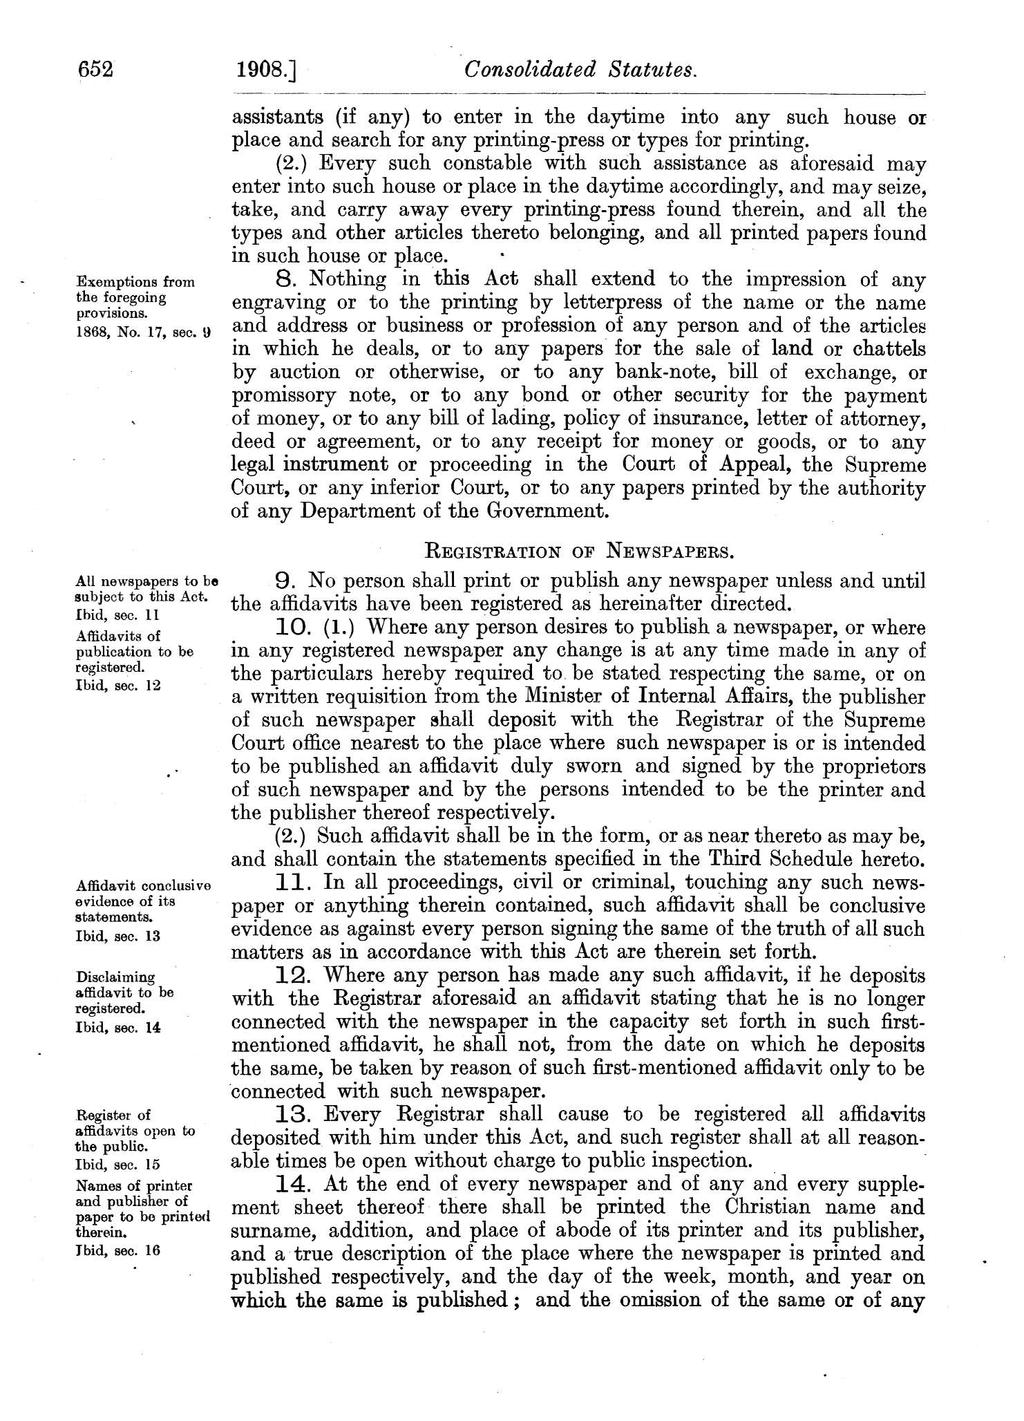 652 1908.] Consolidated Statutes. Exemptions from the foregoing provisions. 1868, No. 17, sec.